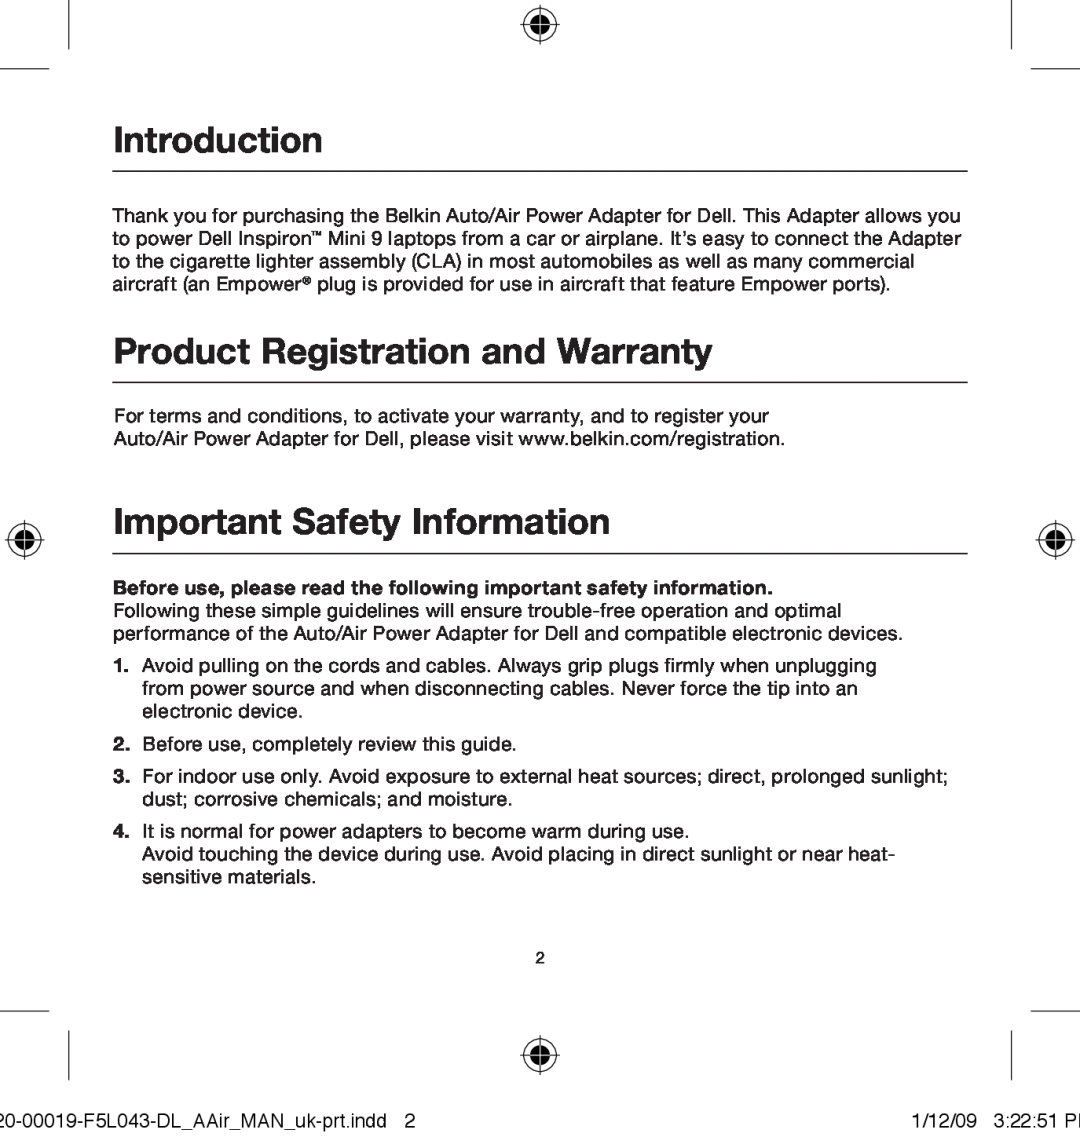 Belkin 0-00019-F5L043 user manual Introduction, Product Registration and Warranty, Important Safety Information 